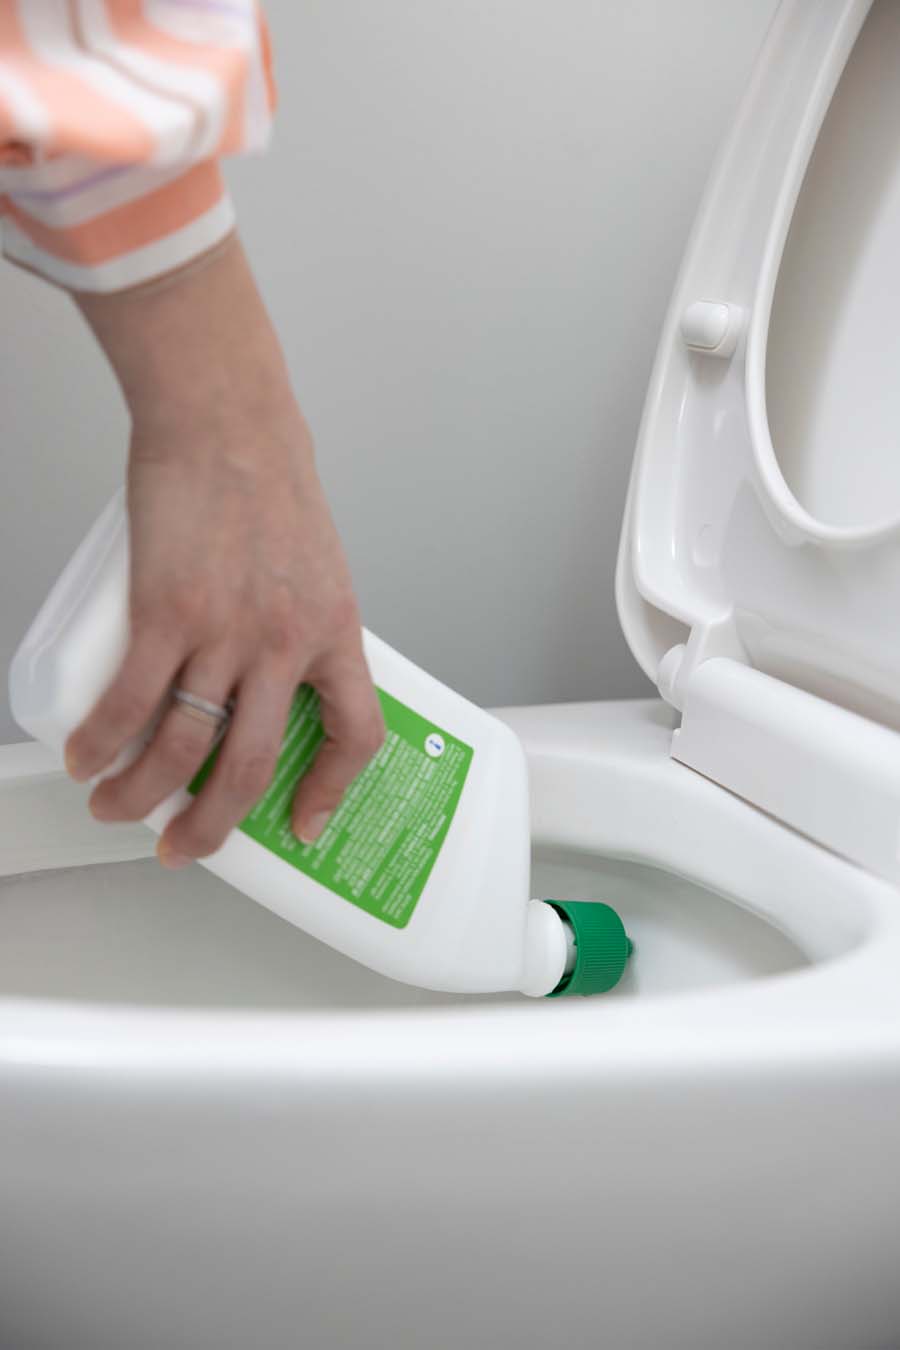 Putting cleaning product in toilet